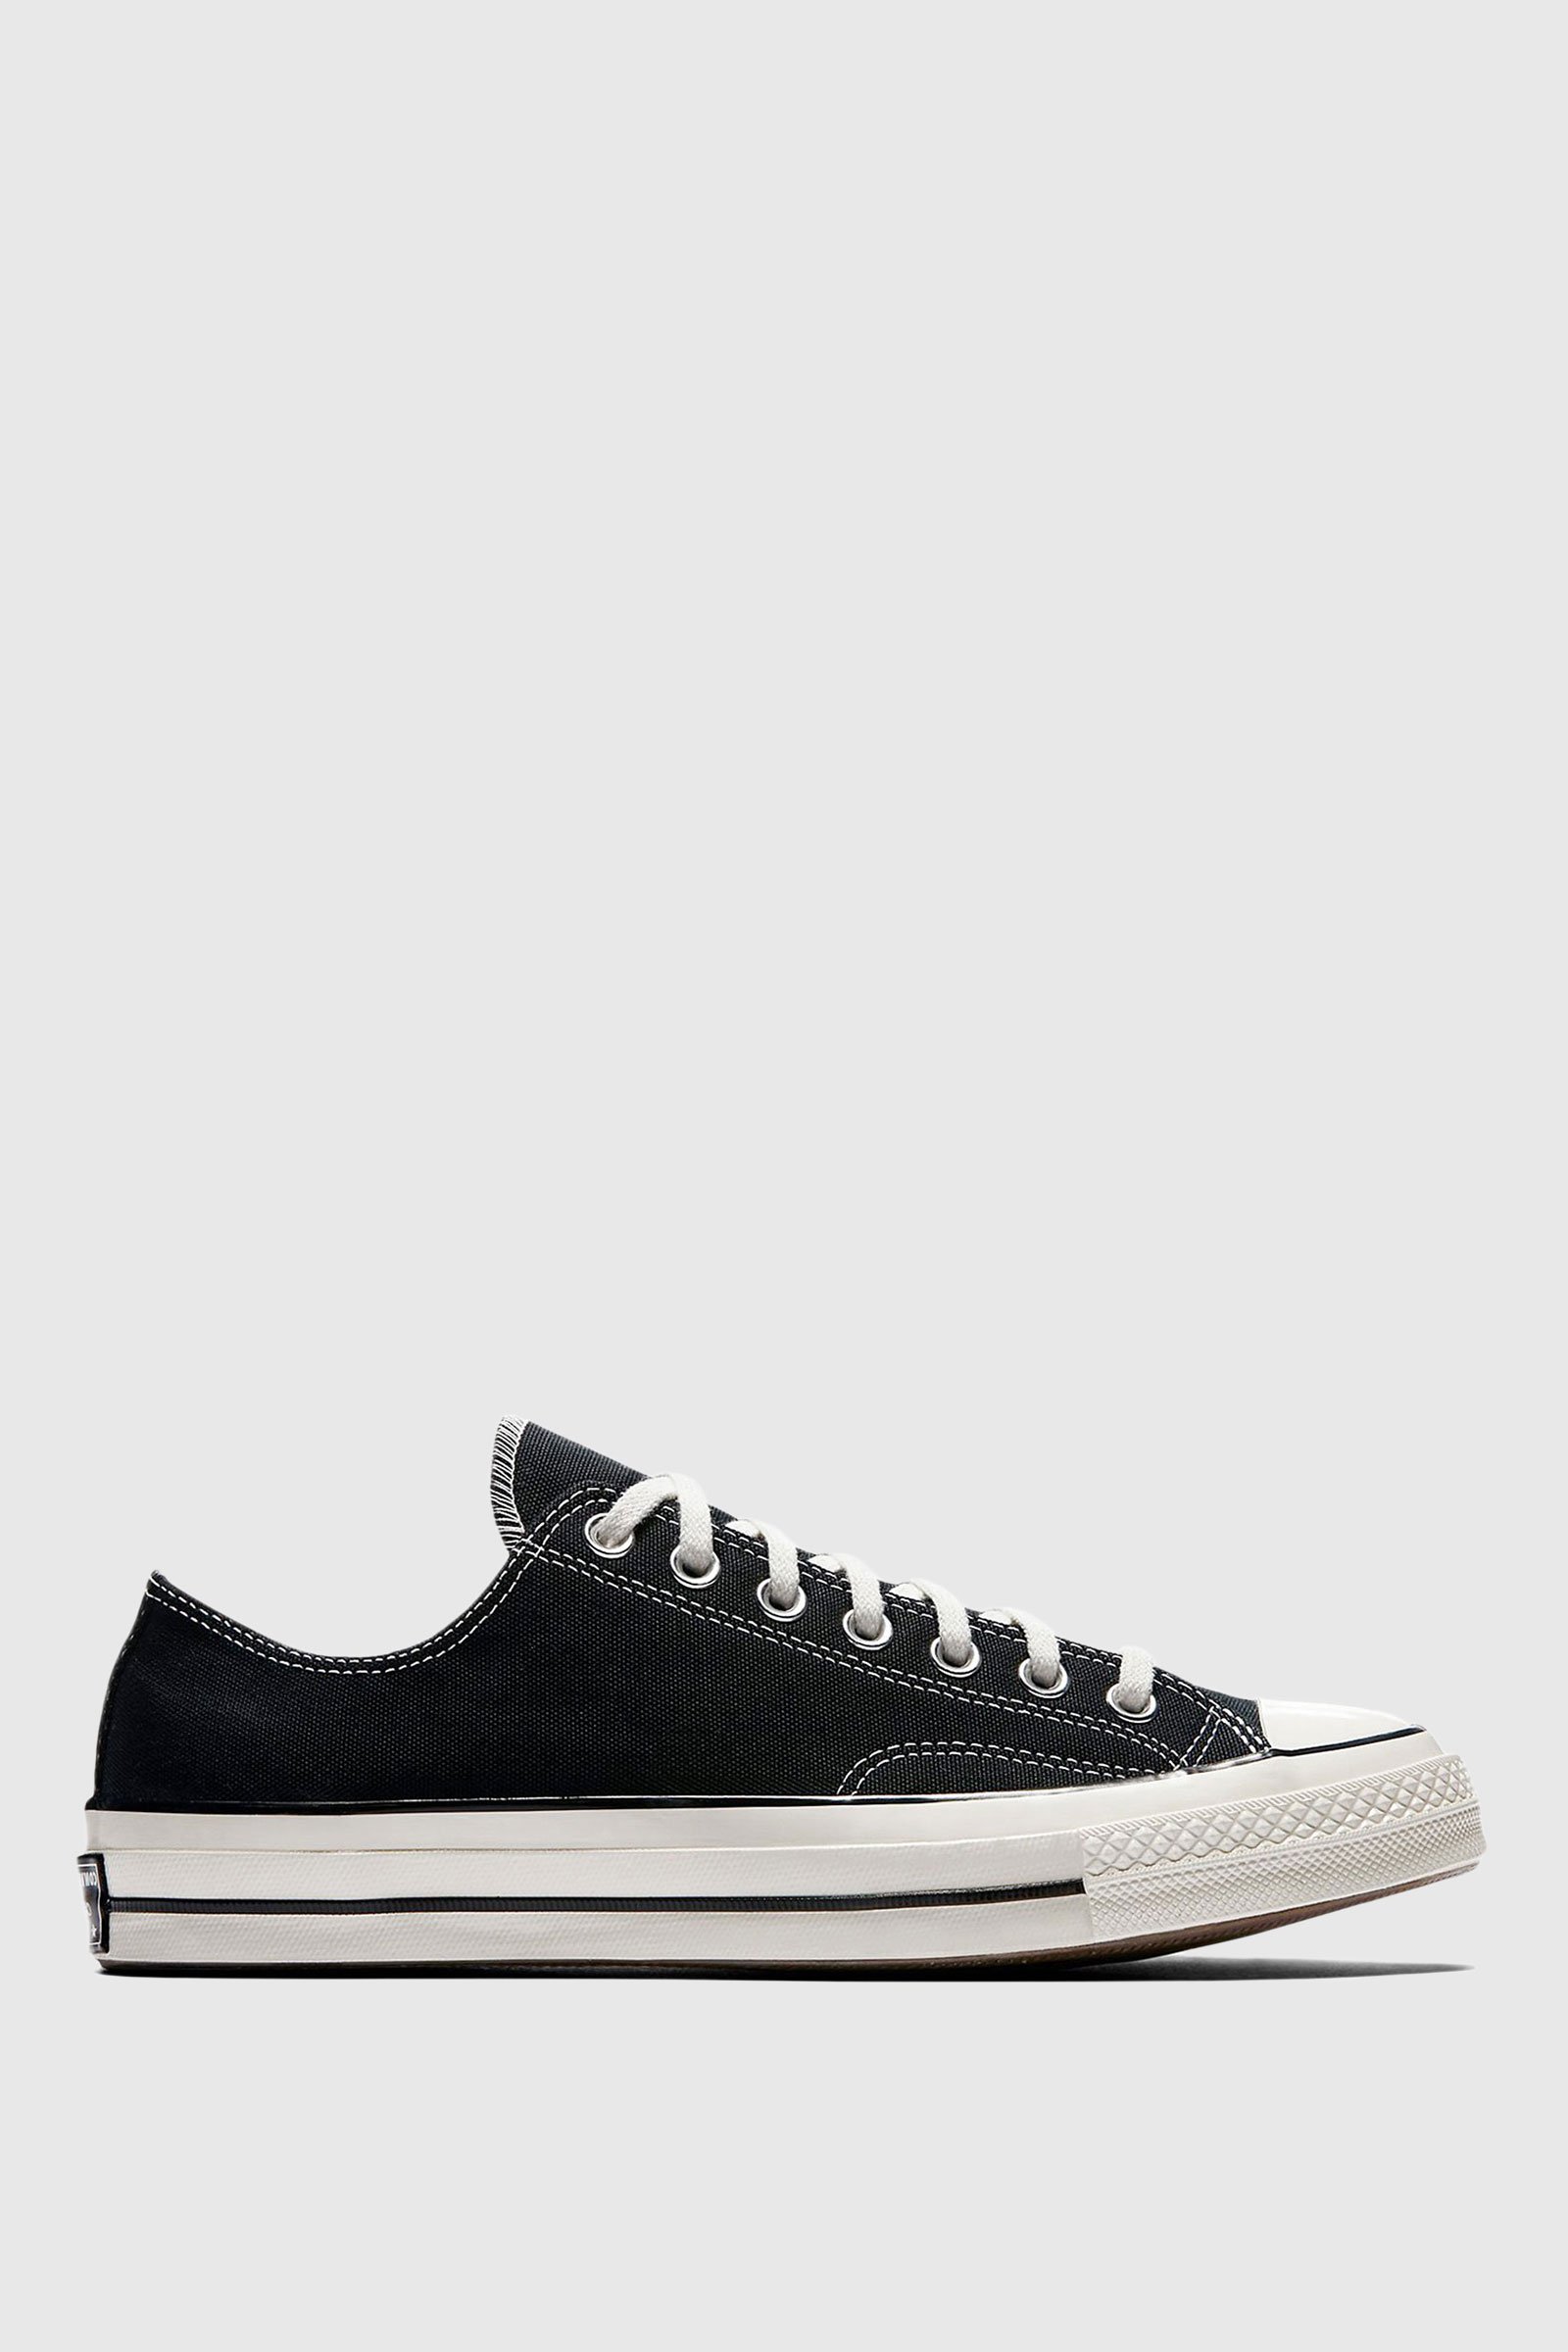 converse chuck taylor all star low 1970